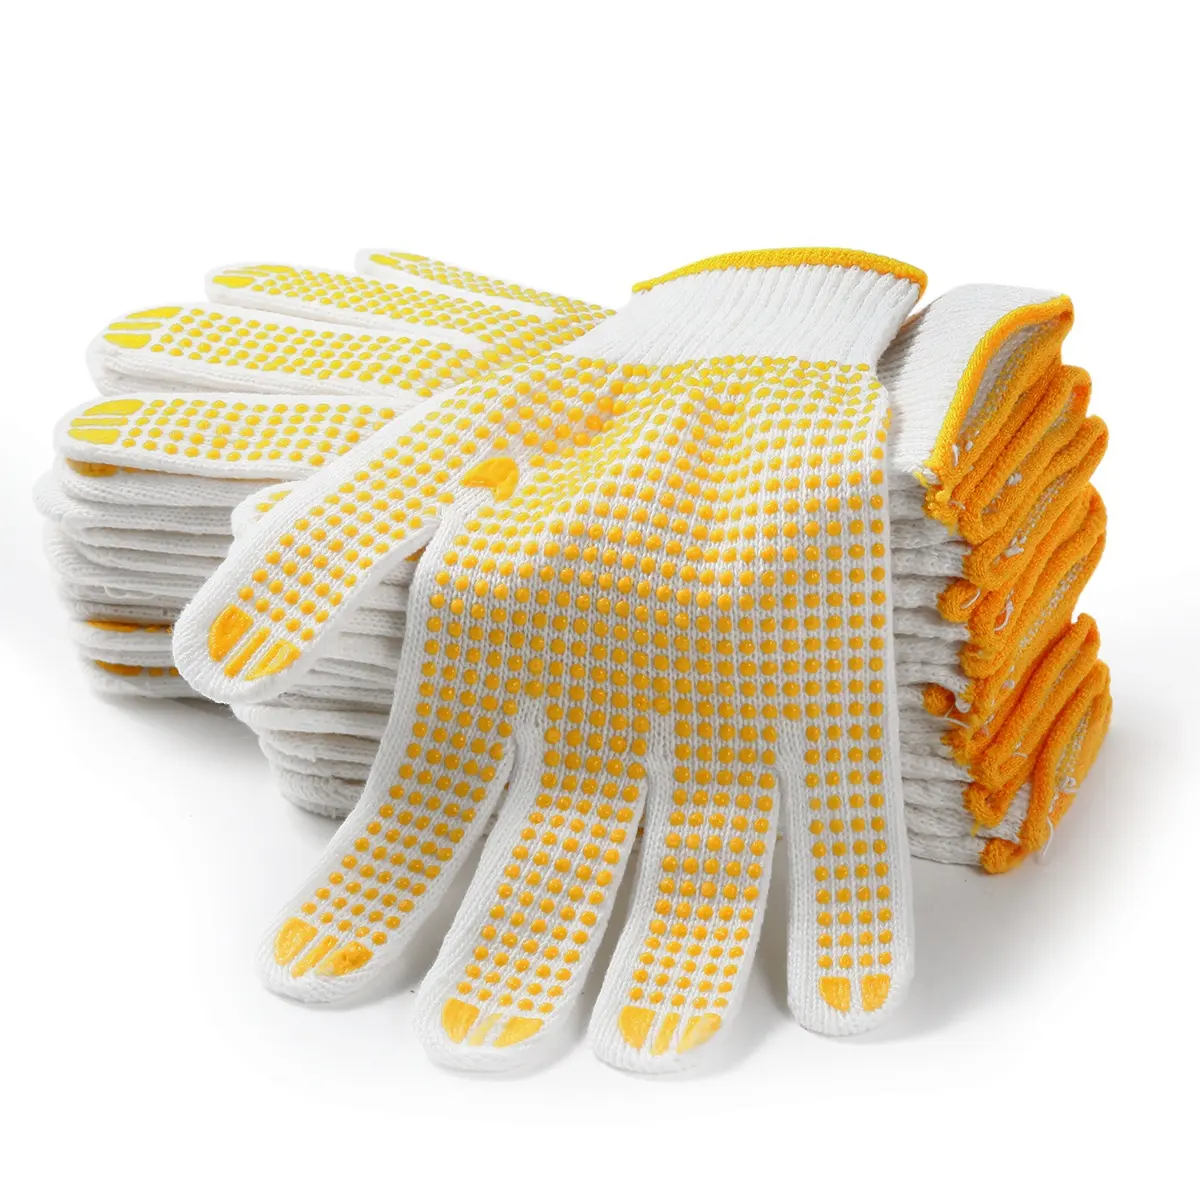 Nature white soft comfortable single side safety garden work hand pvc dotted cotton work gloves